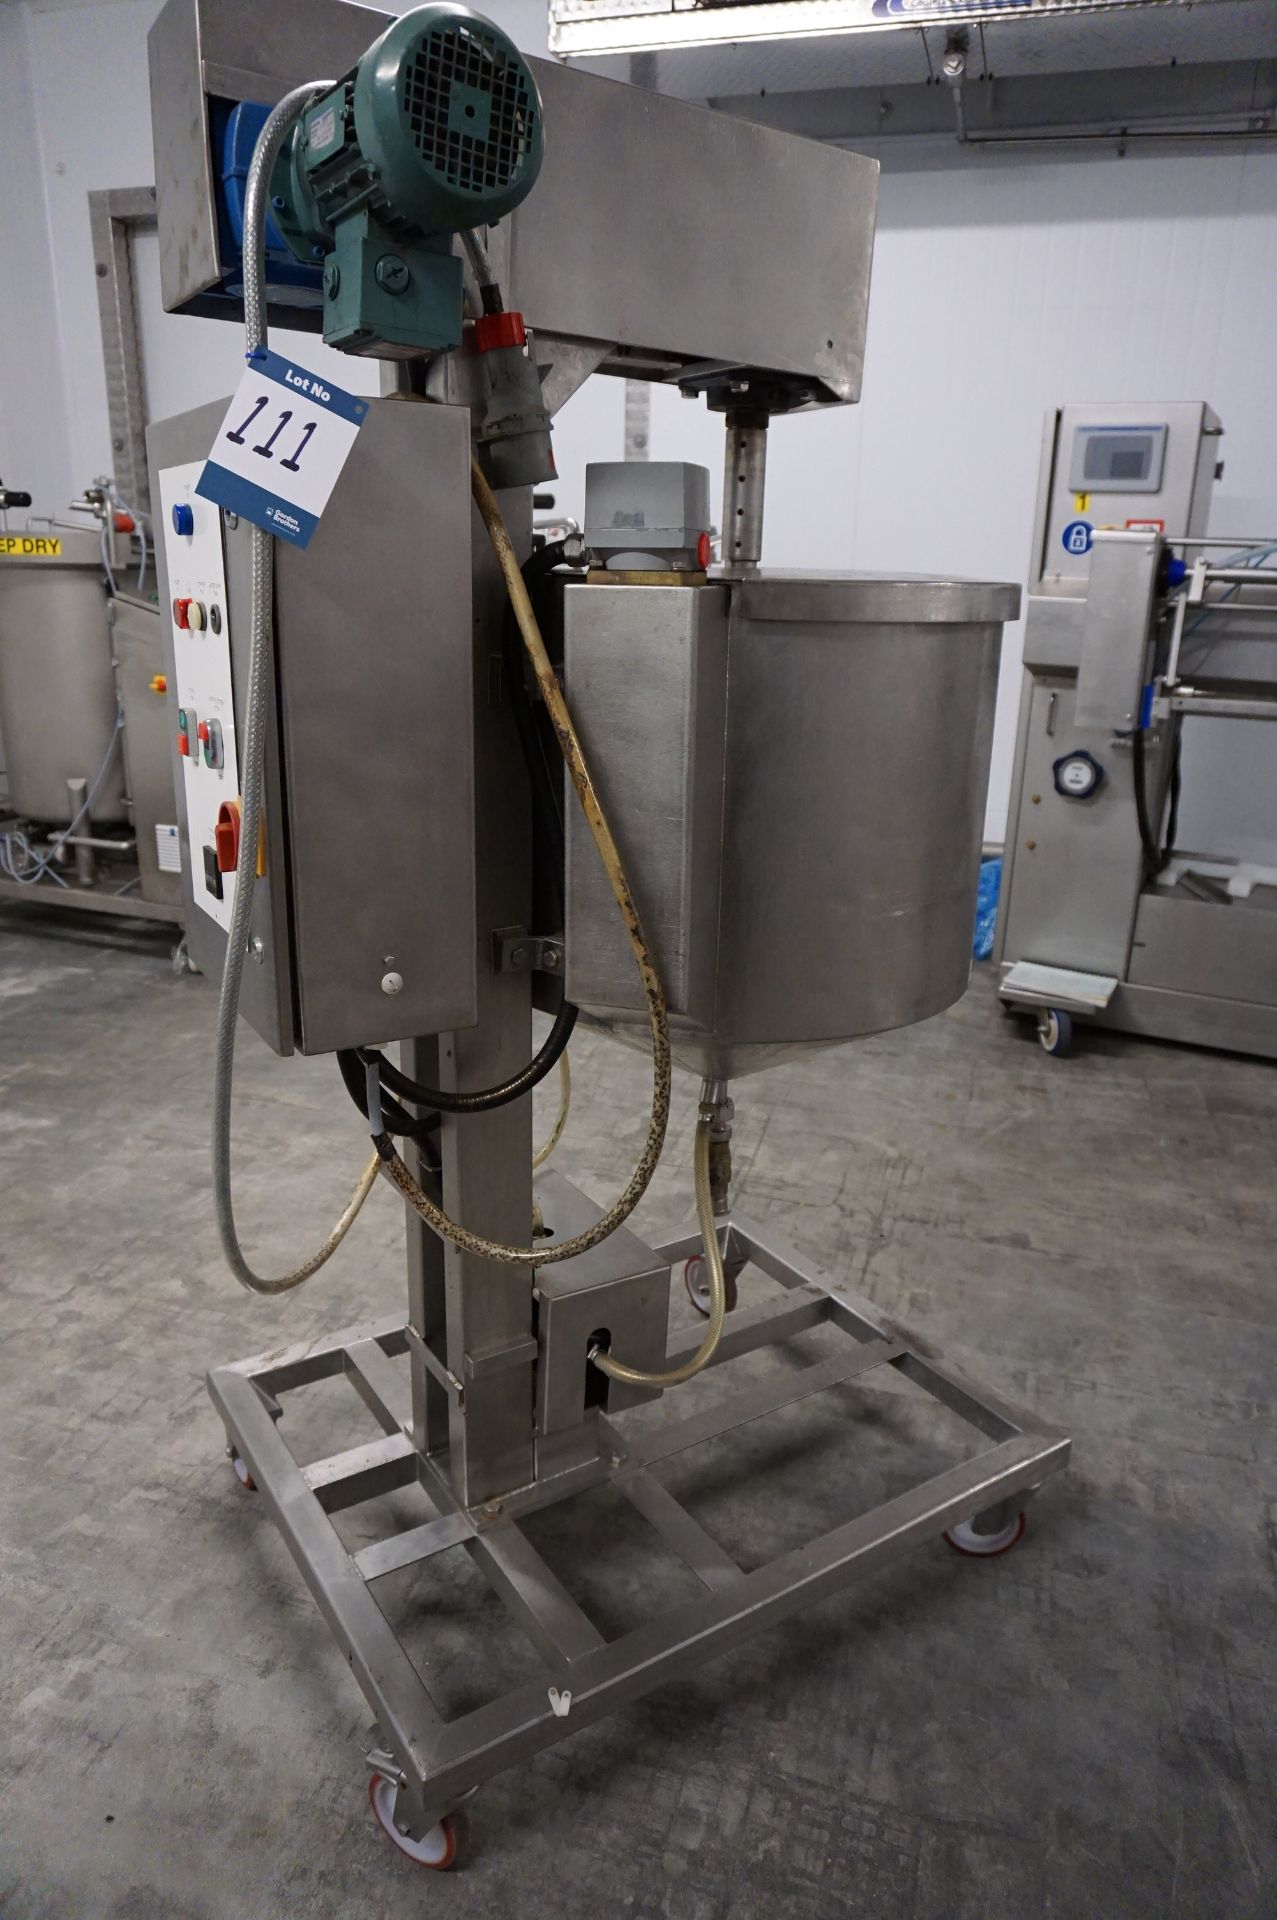 Unbadged mobile chocolate mixing vat, approc 100L with controls